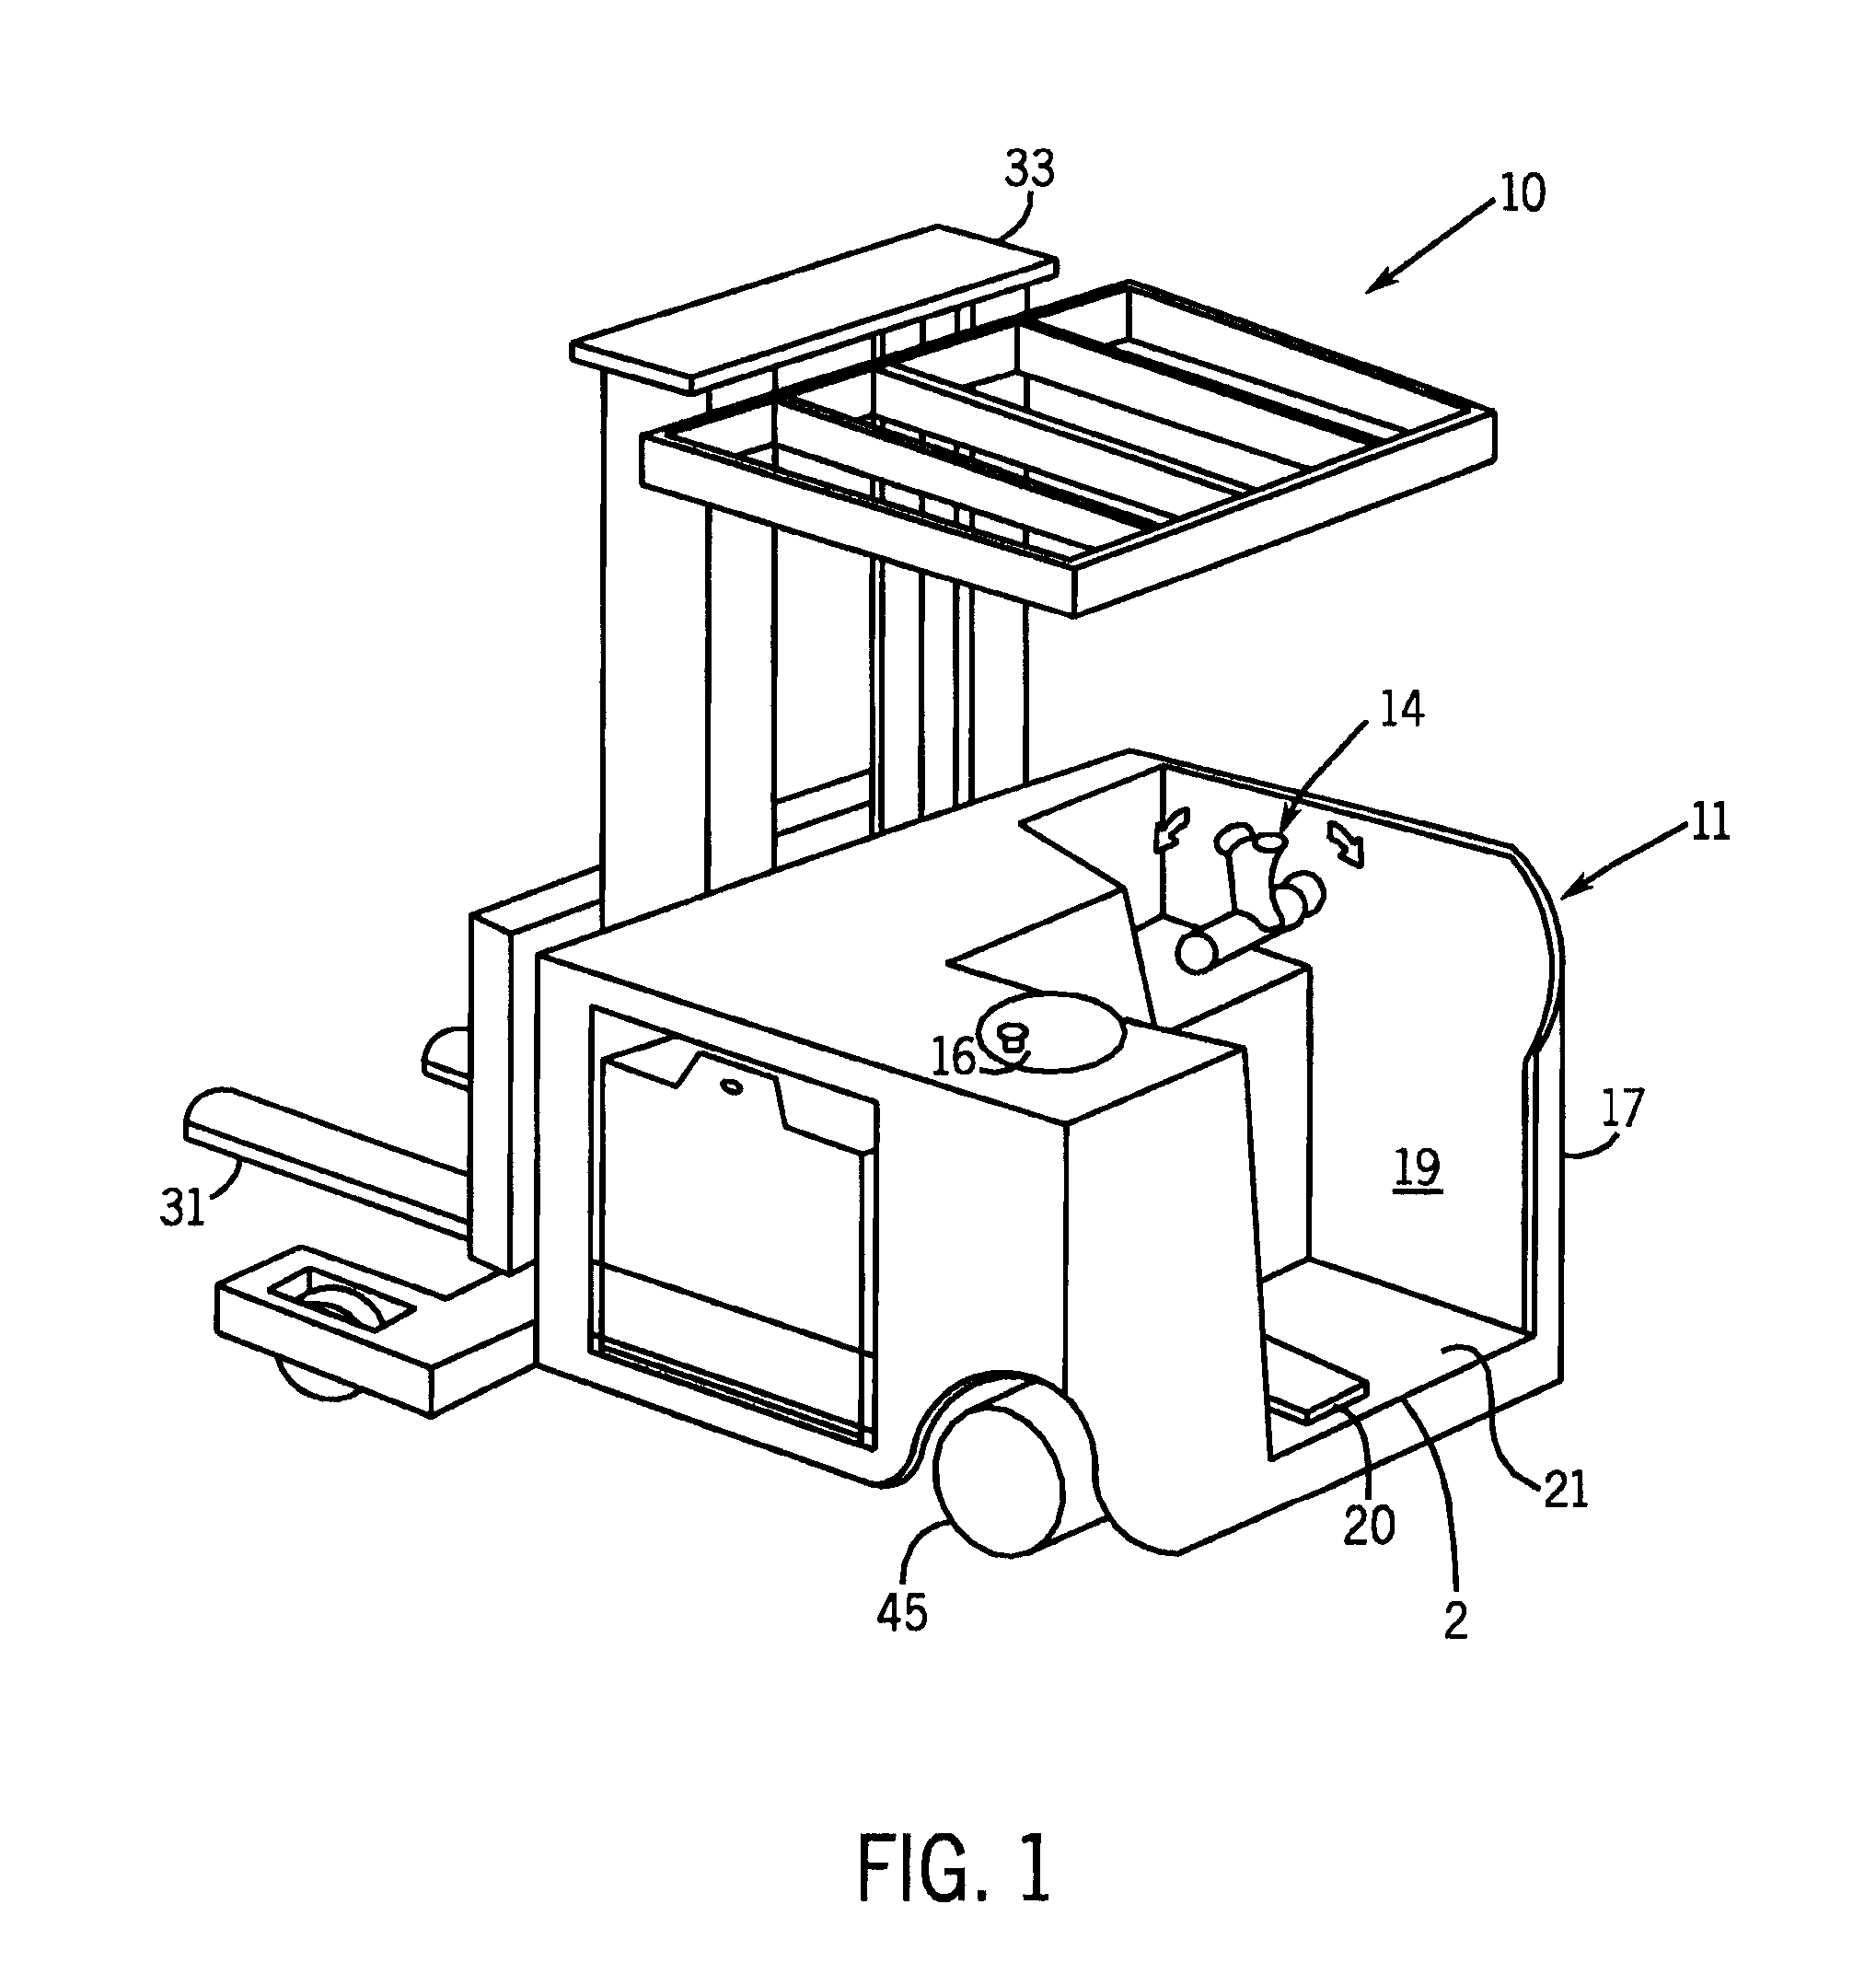 Energy storage module for load leveling in lift truck or other electrical vehicle